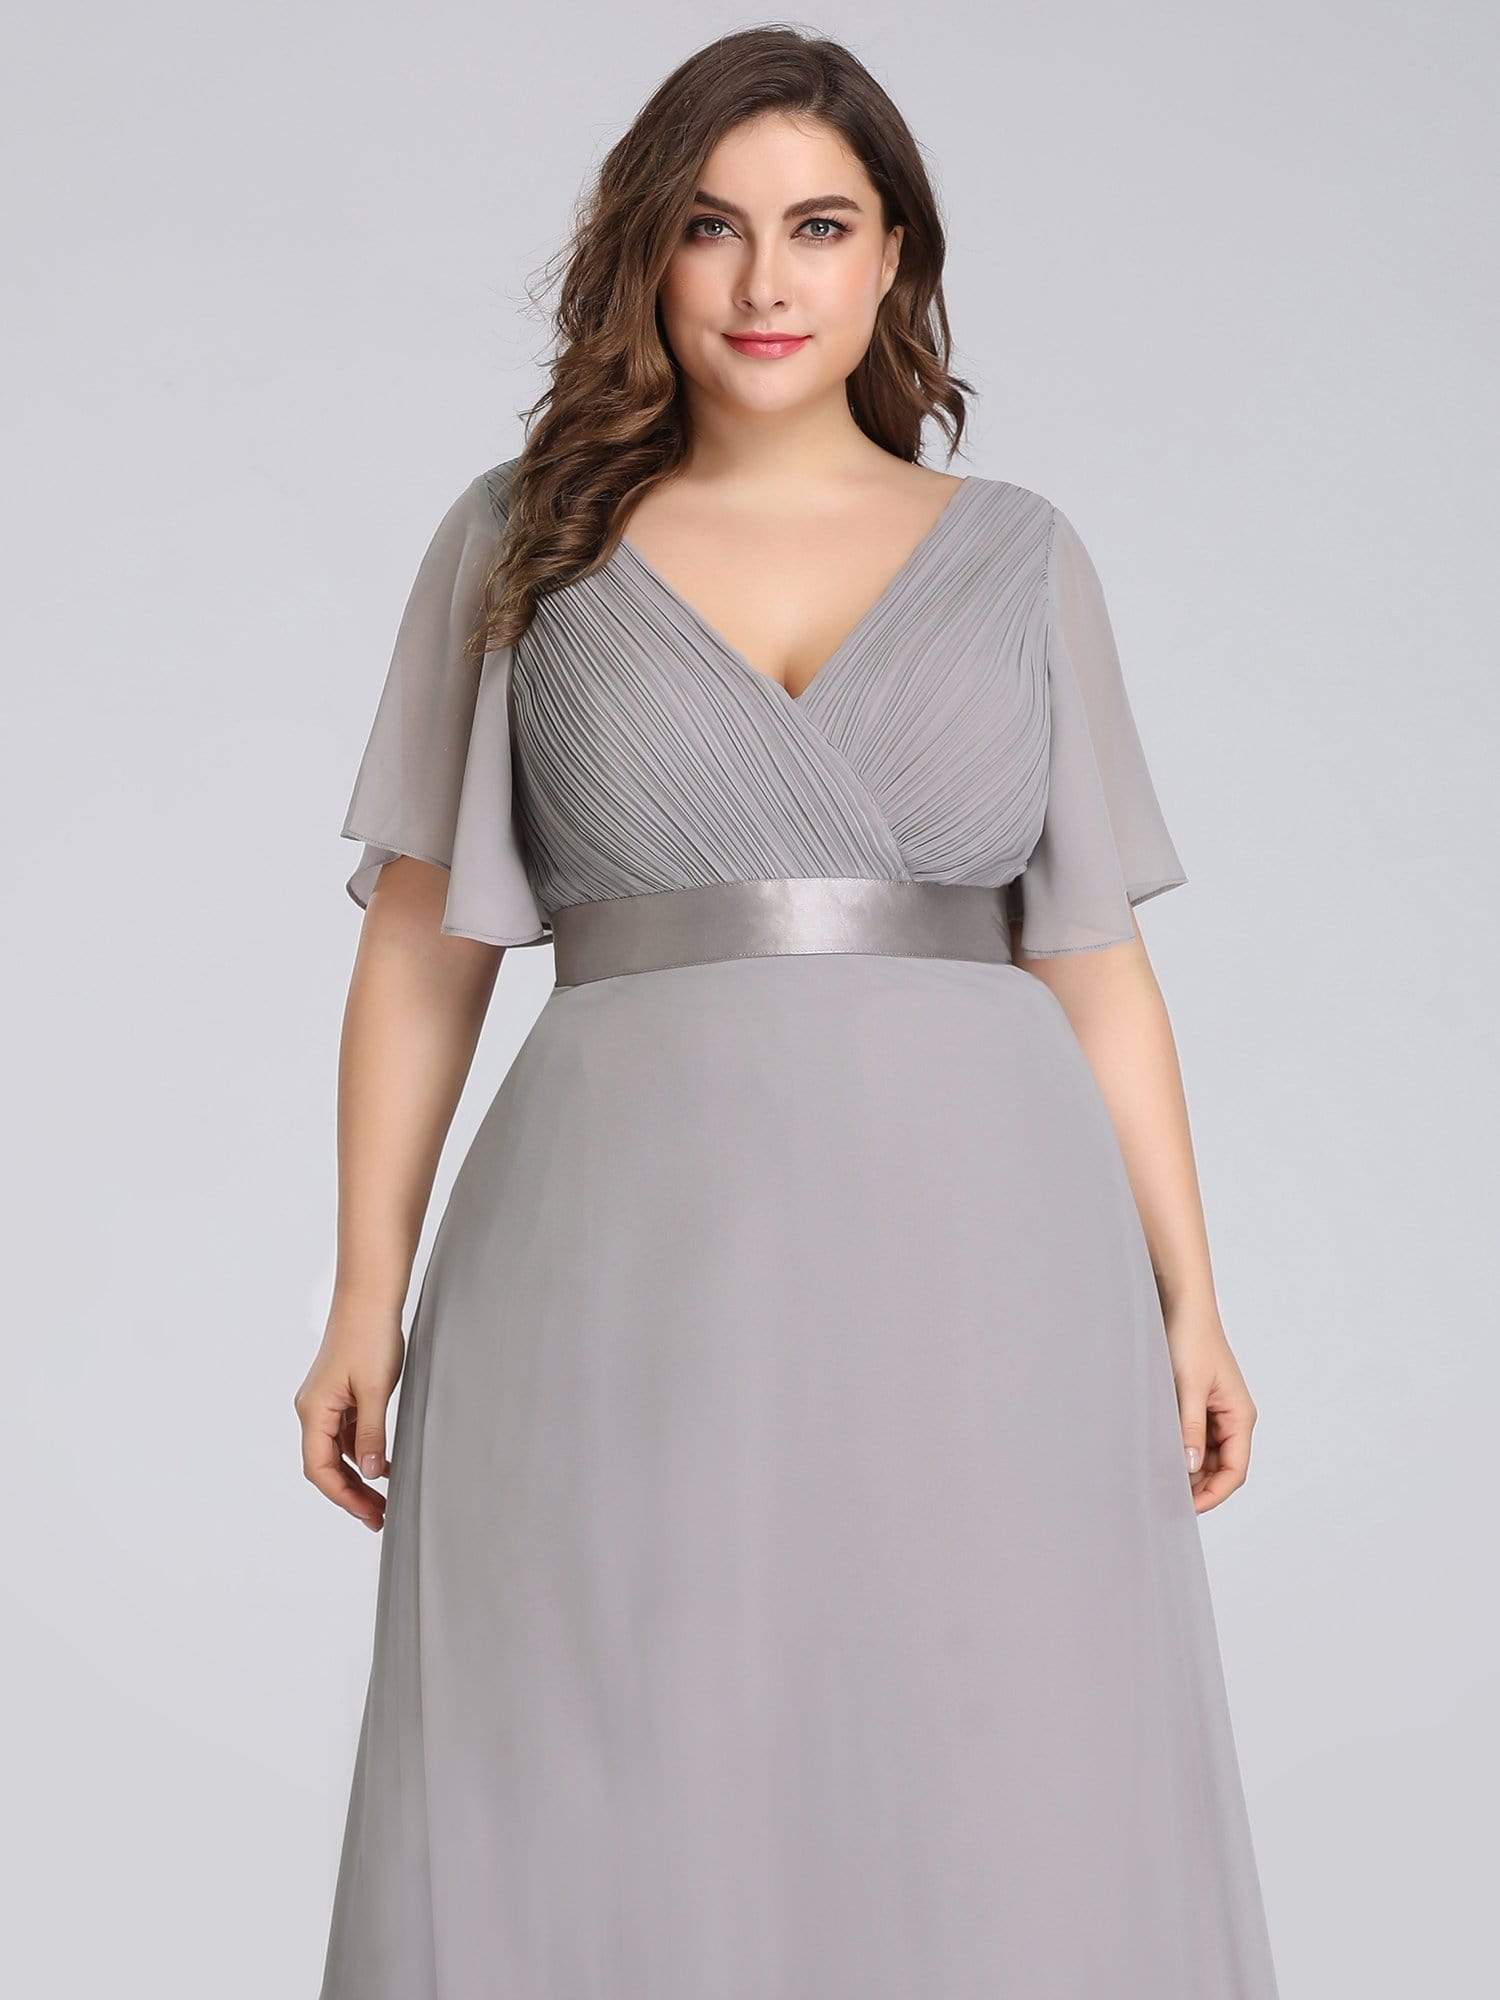 Plus Size Empire Waist Evening Dress with Short Sleeves